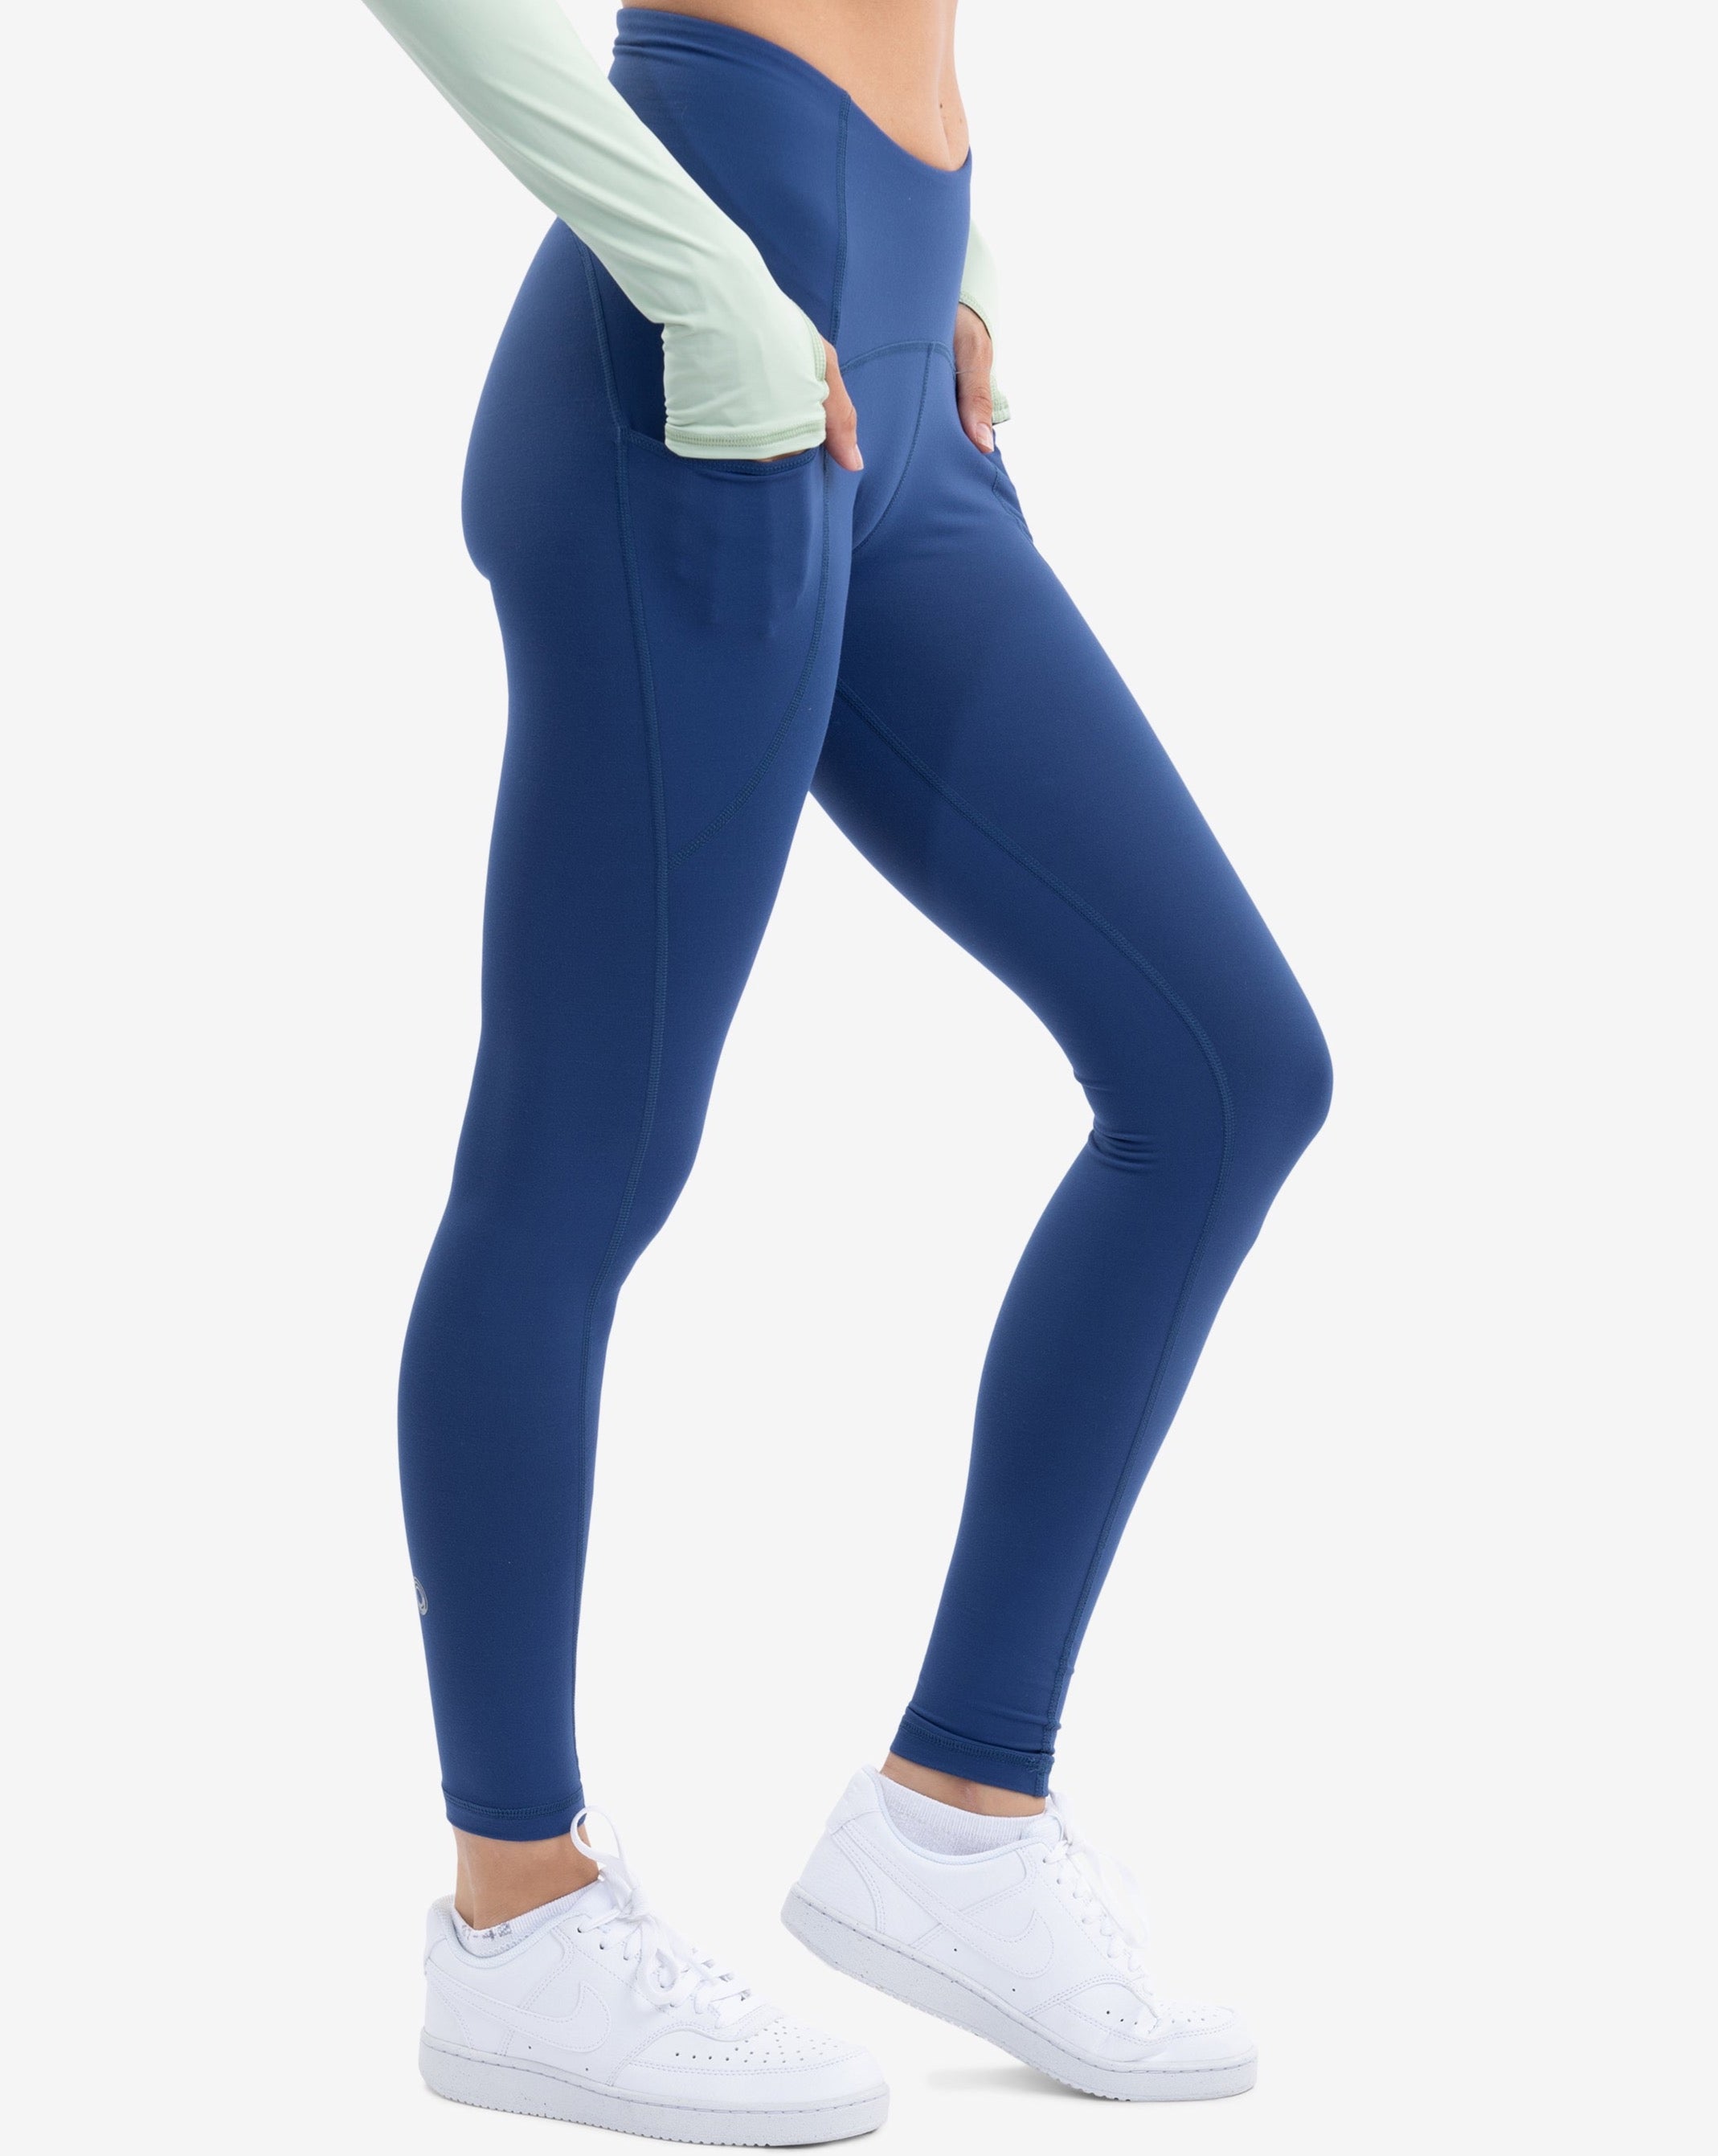 YWDJ High Waisted Compression Leggings for Women Solid Warm Tight